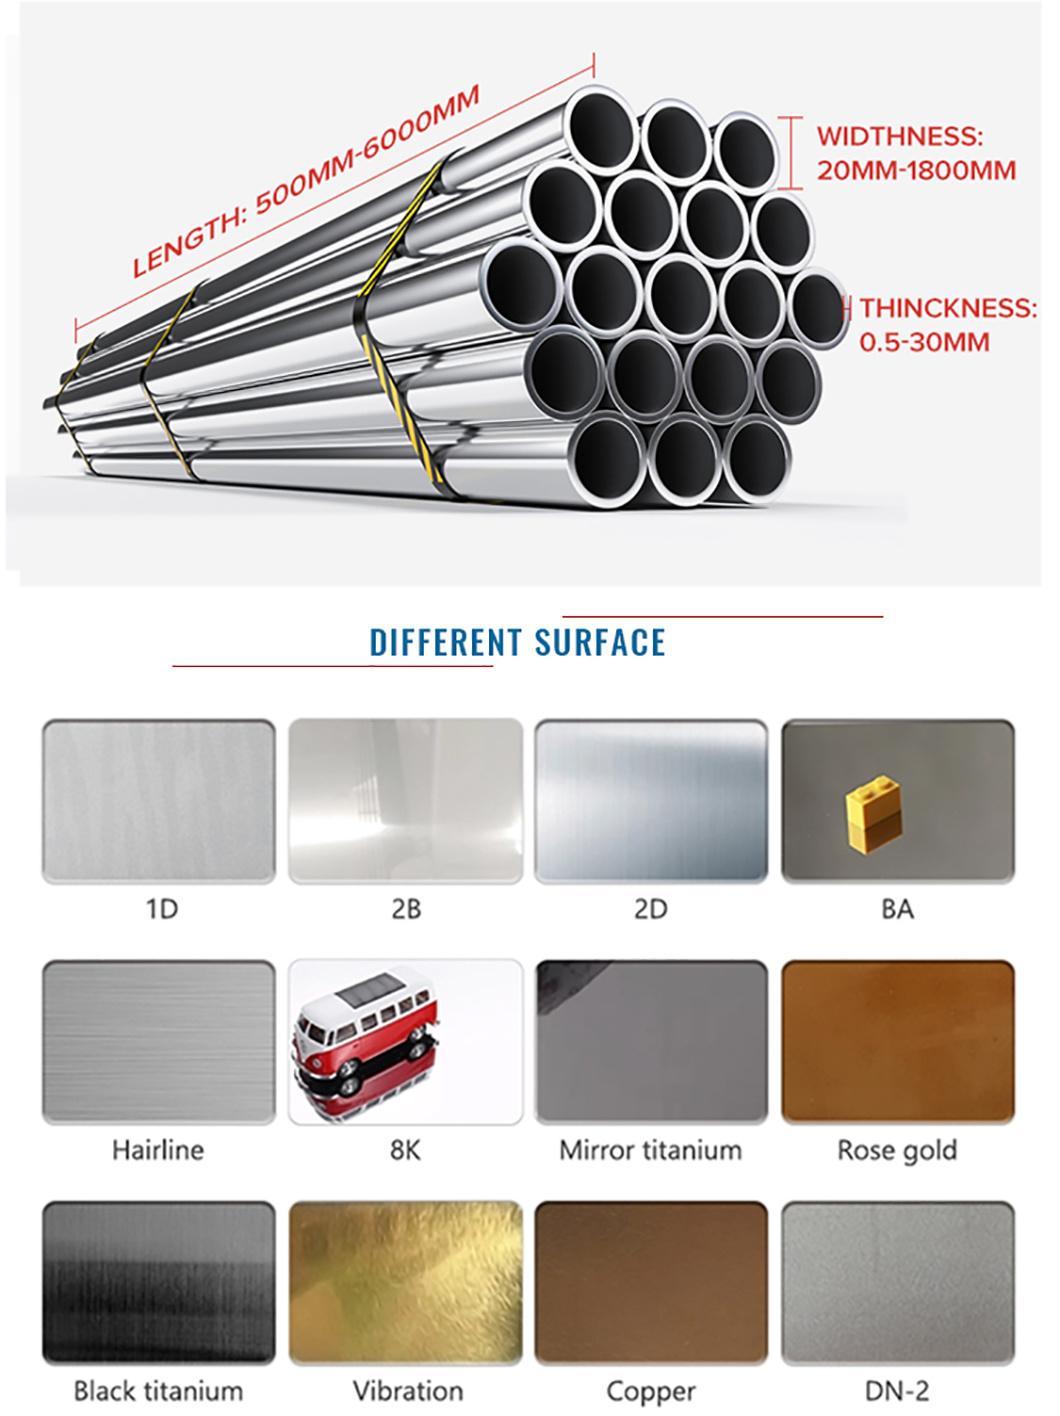 Bright Annealed TP304L Tp316L Stainless Seamless Steel Tube